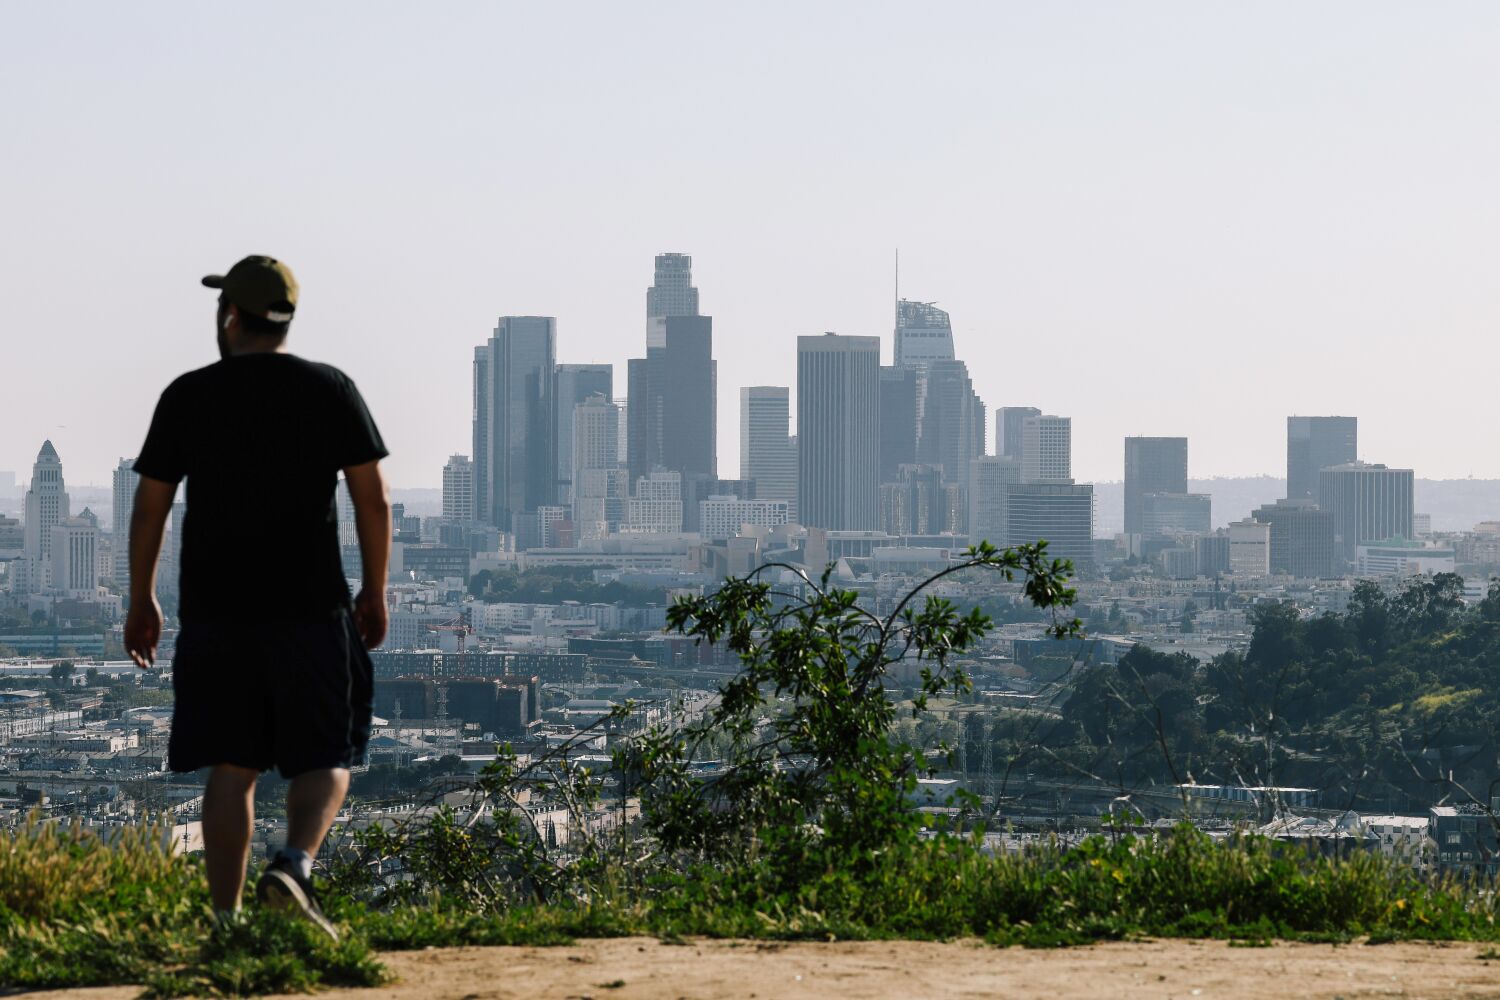 L.A. air the 'cleanest' it's been in a decade, but rising temperatures could change that